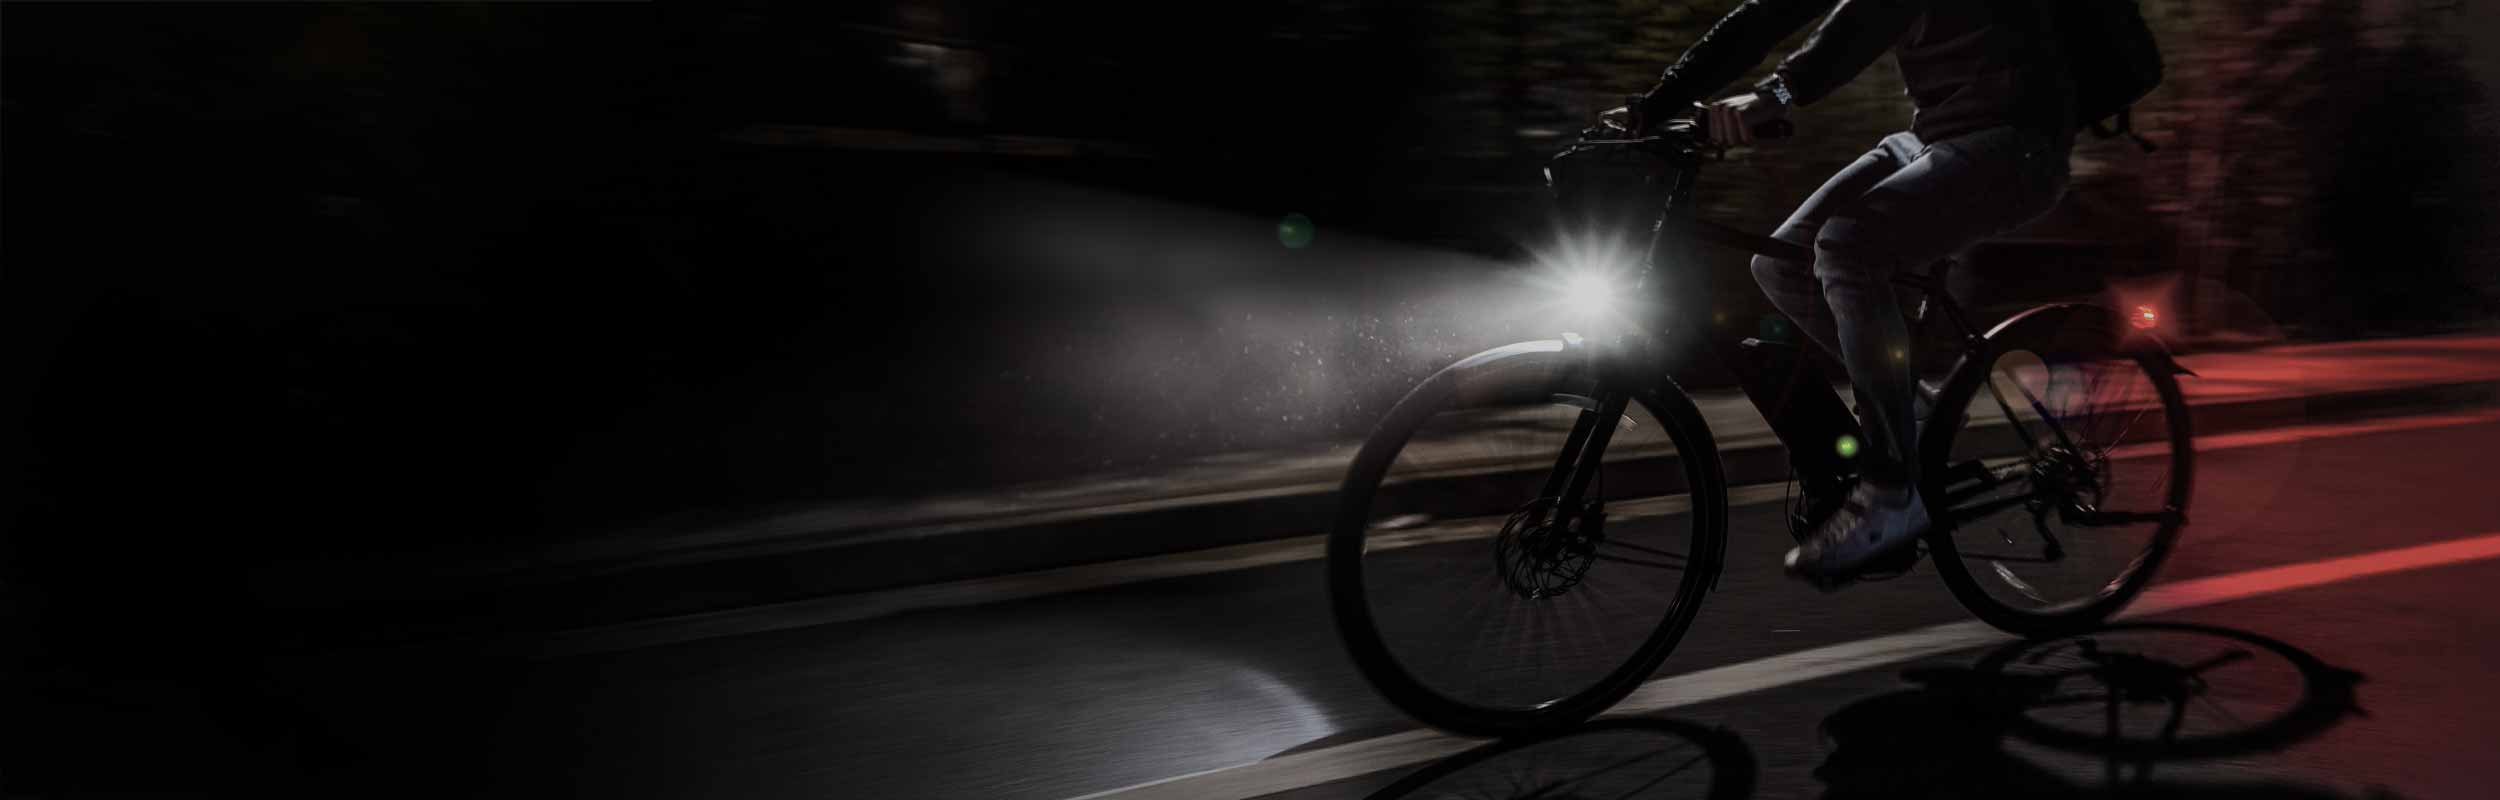 An e-bike that appears to be moving quickly on a road being ridden at night with a front light and a rear light mounted on the bike.